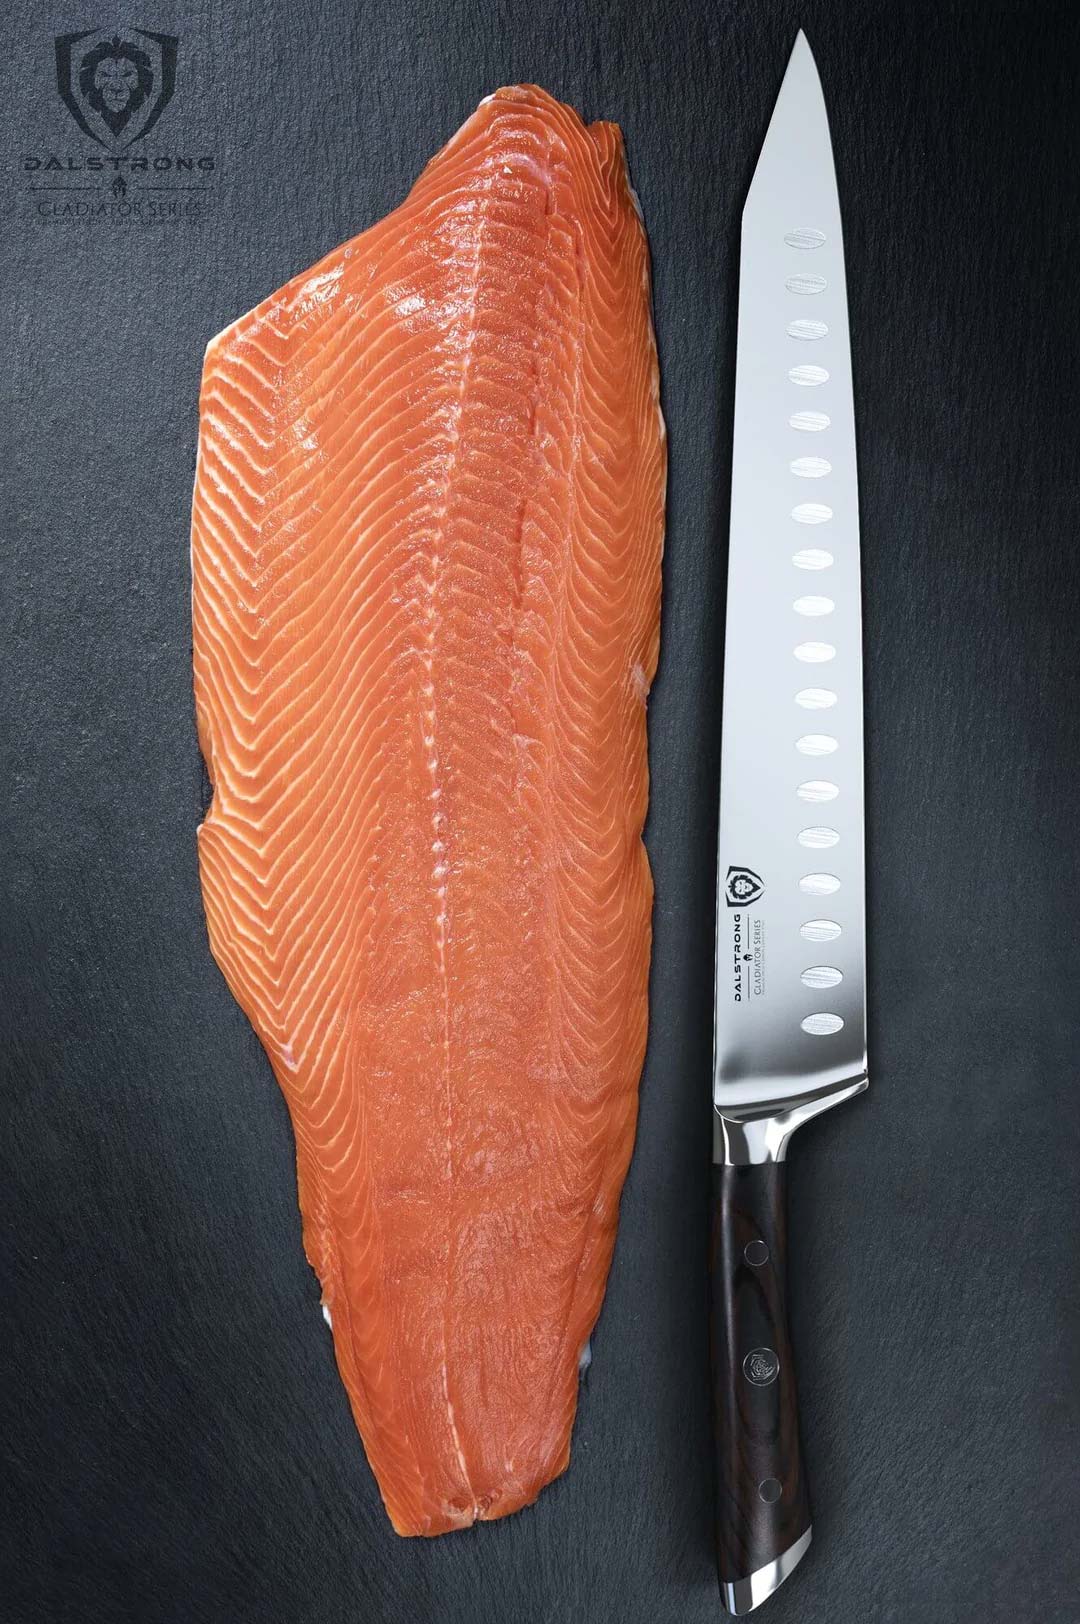 Dalstrong gladiator series 12 inch sujihiki knife with black handle and a fillet of salmon.